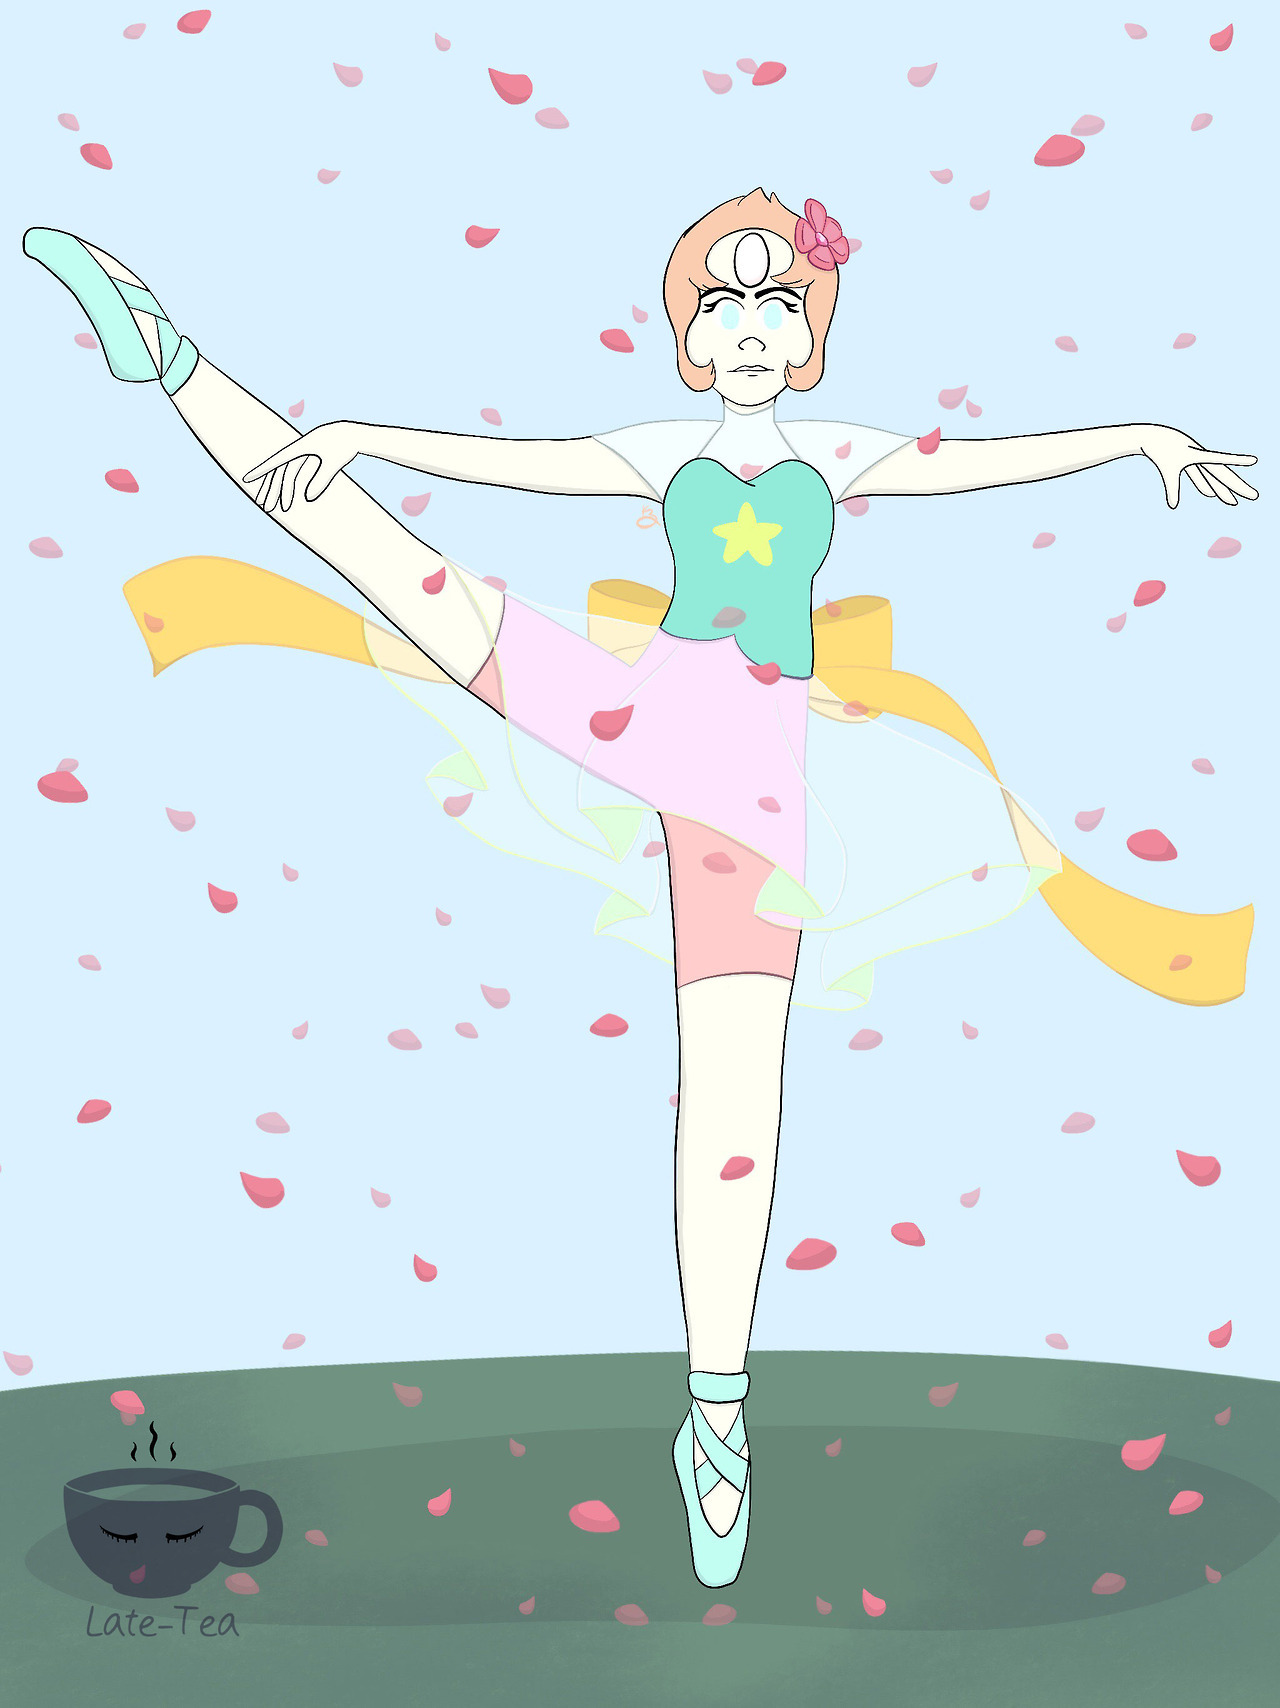 My three dancing Pearls I drew for my dancing pearl series of speed drawings. I uploaded one speed drawing video to my youtube channel, and plan to upload the rest soon!